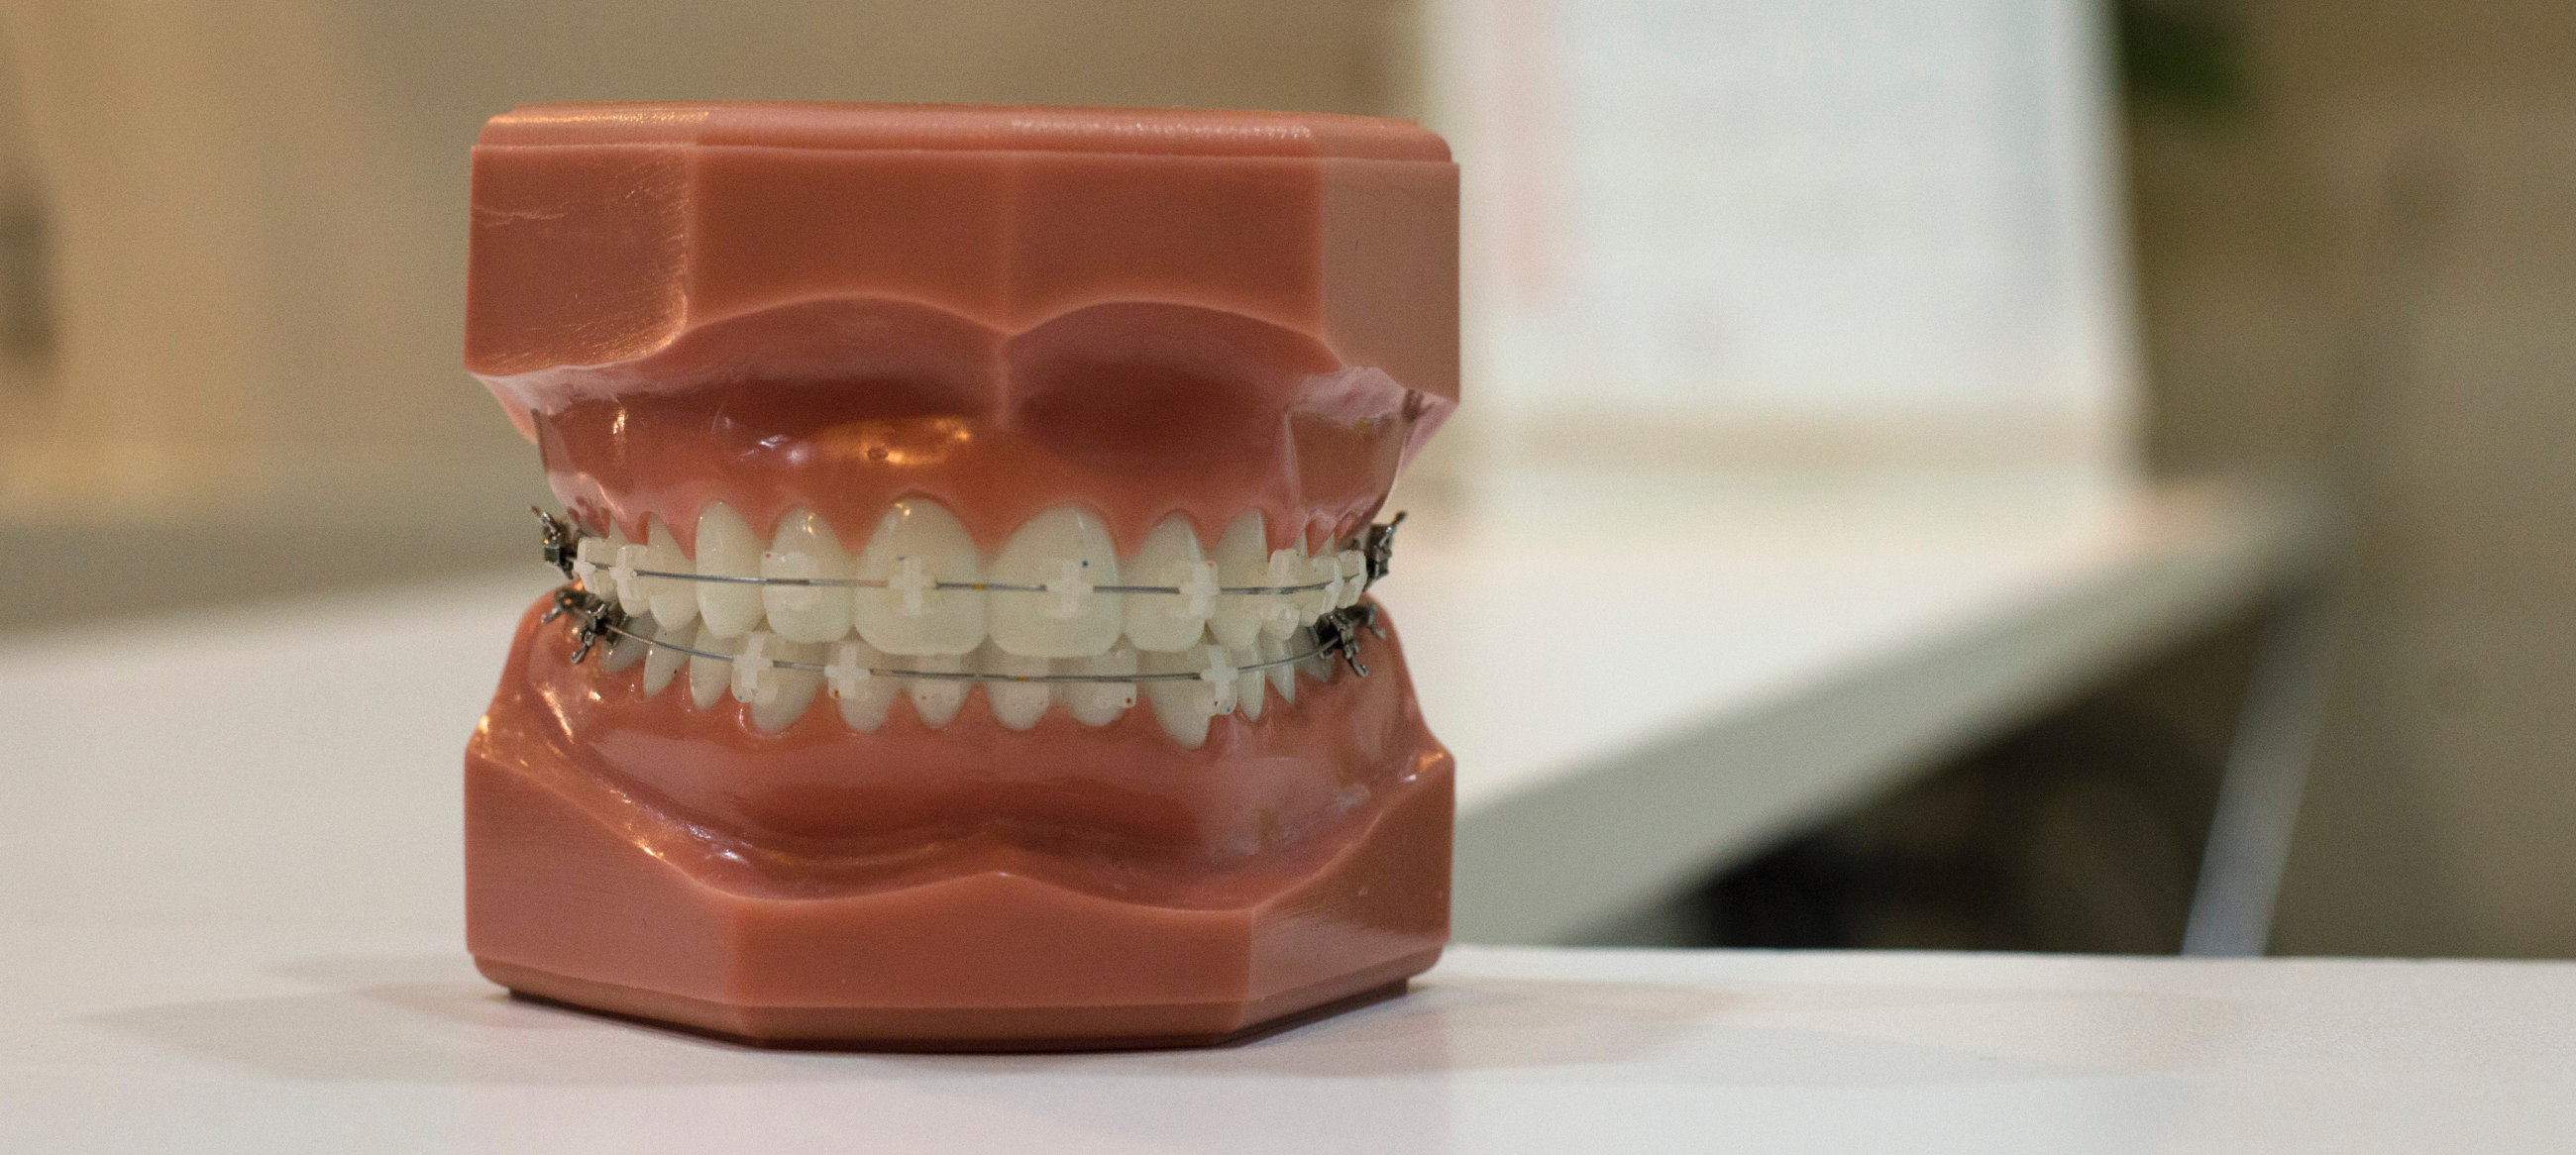 A model of teeth with braces.